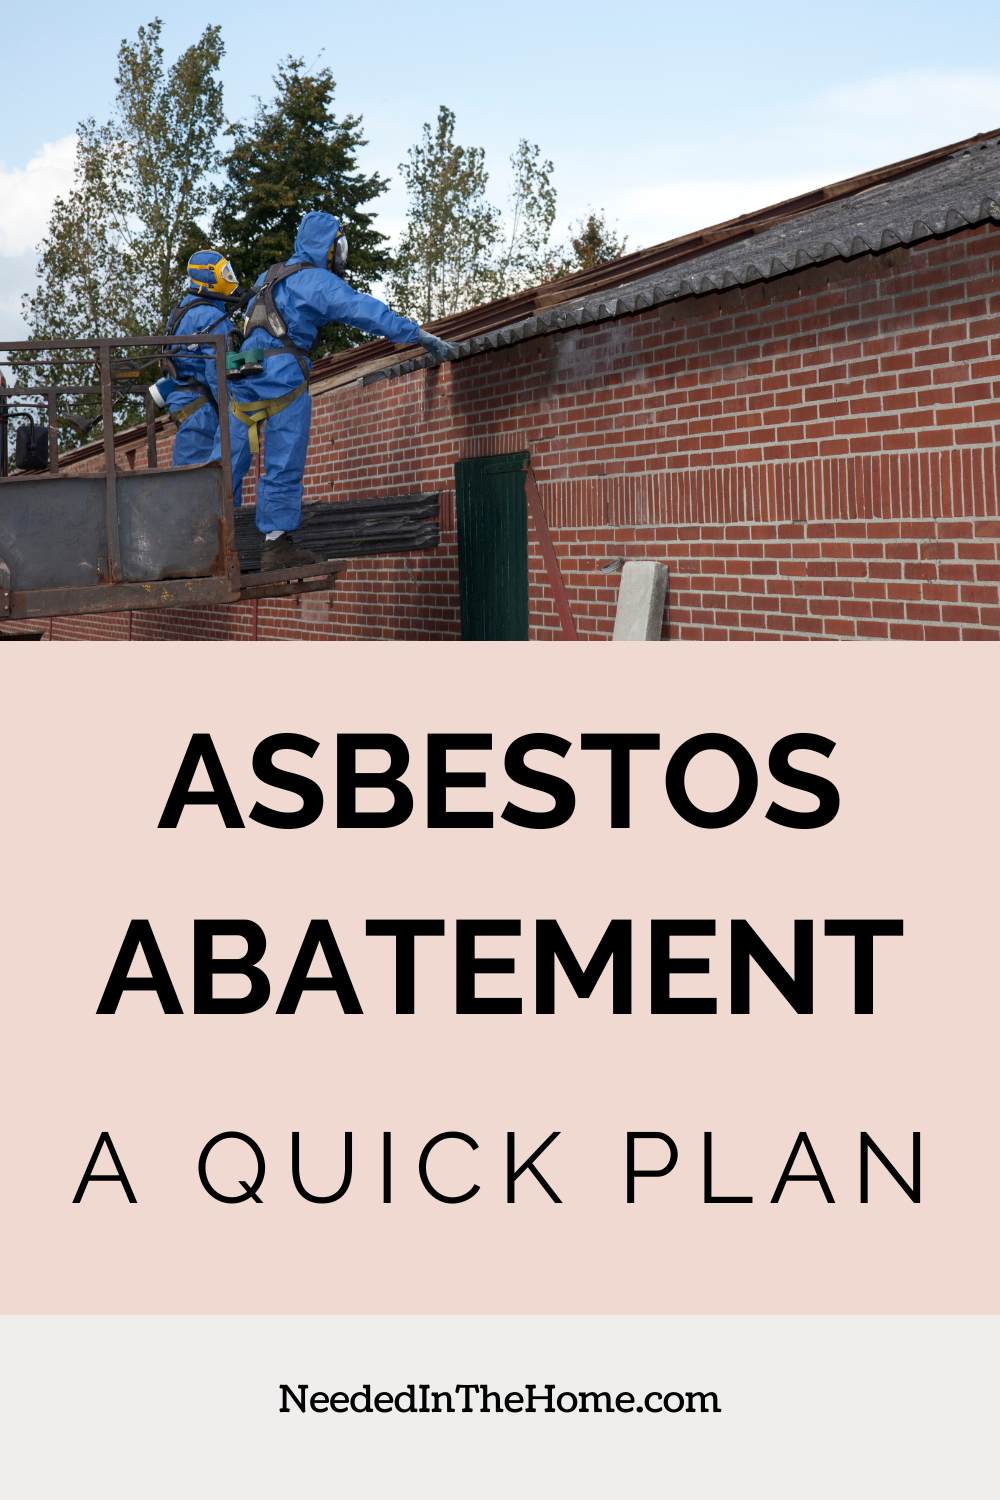 pinterest-pin-description asbestos abatement a quick plan people in hazmat suits leaning towards a roof to deal with asbestos neededinthehome